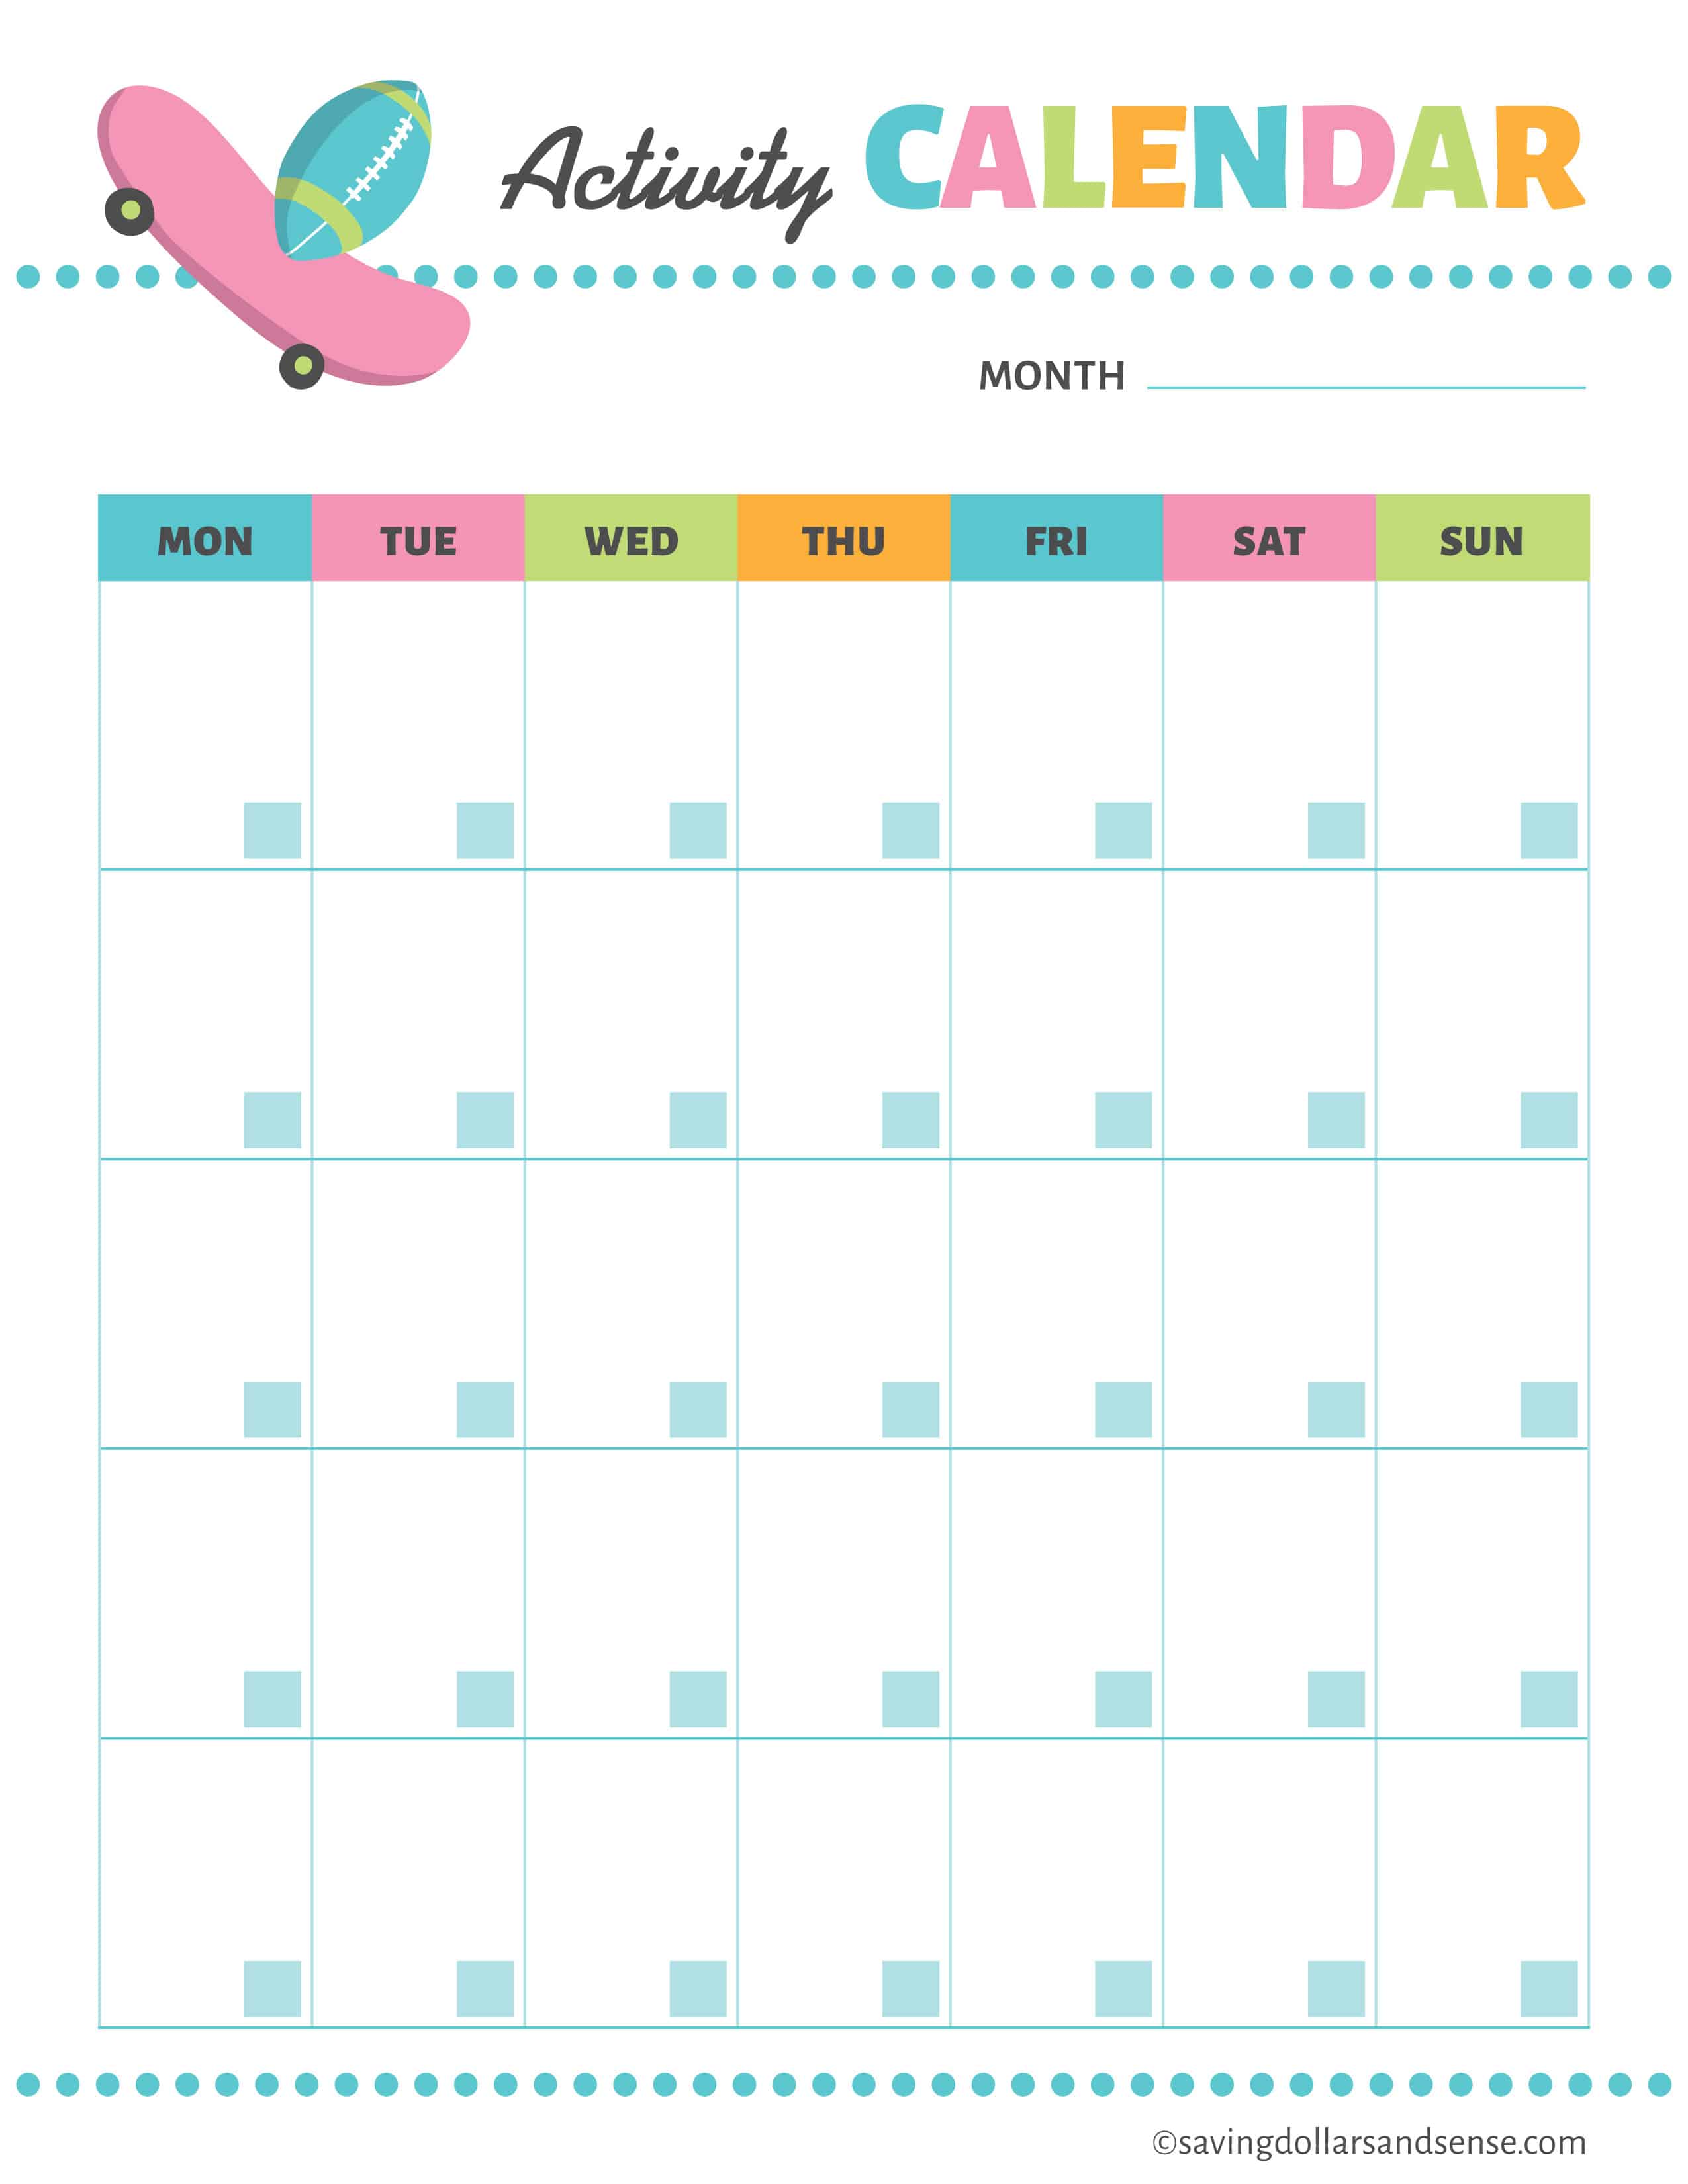 Activity calendar from the Printable School Planning Kit